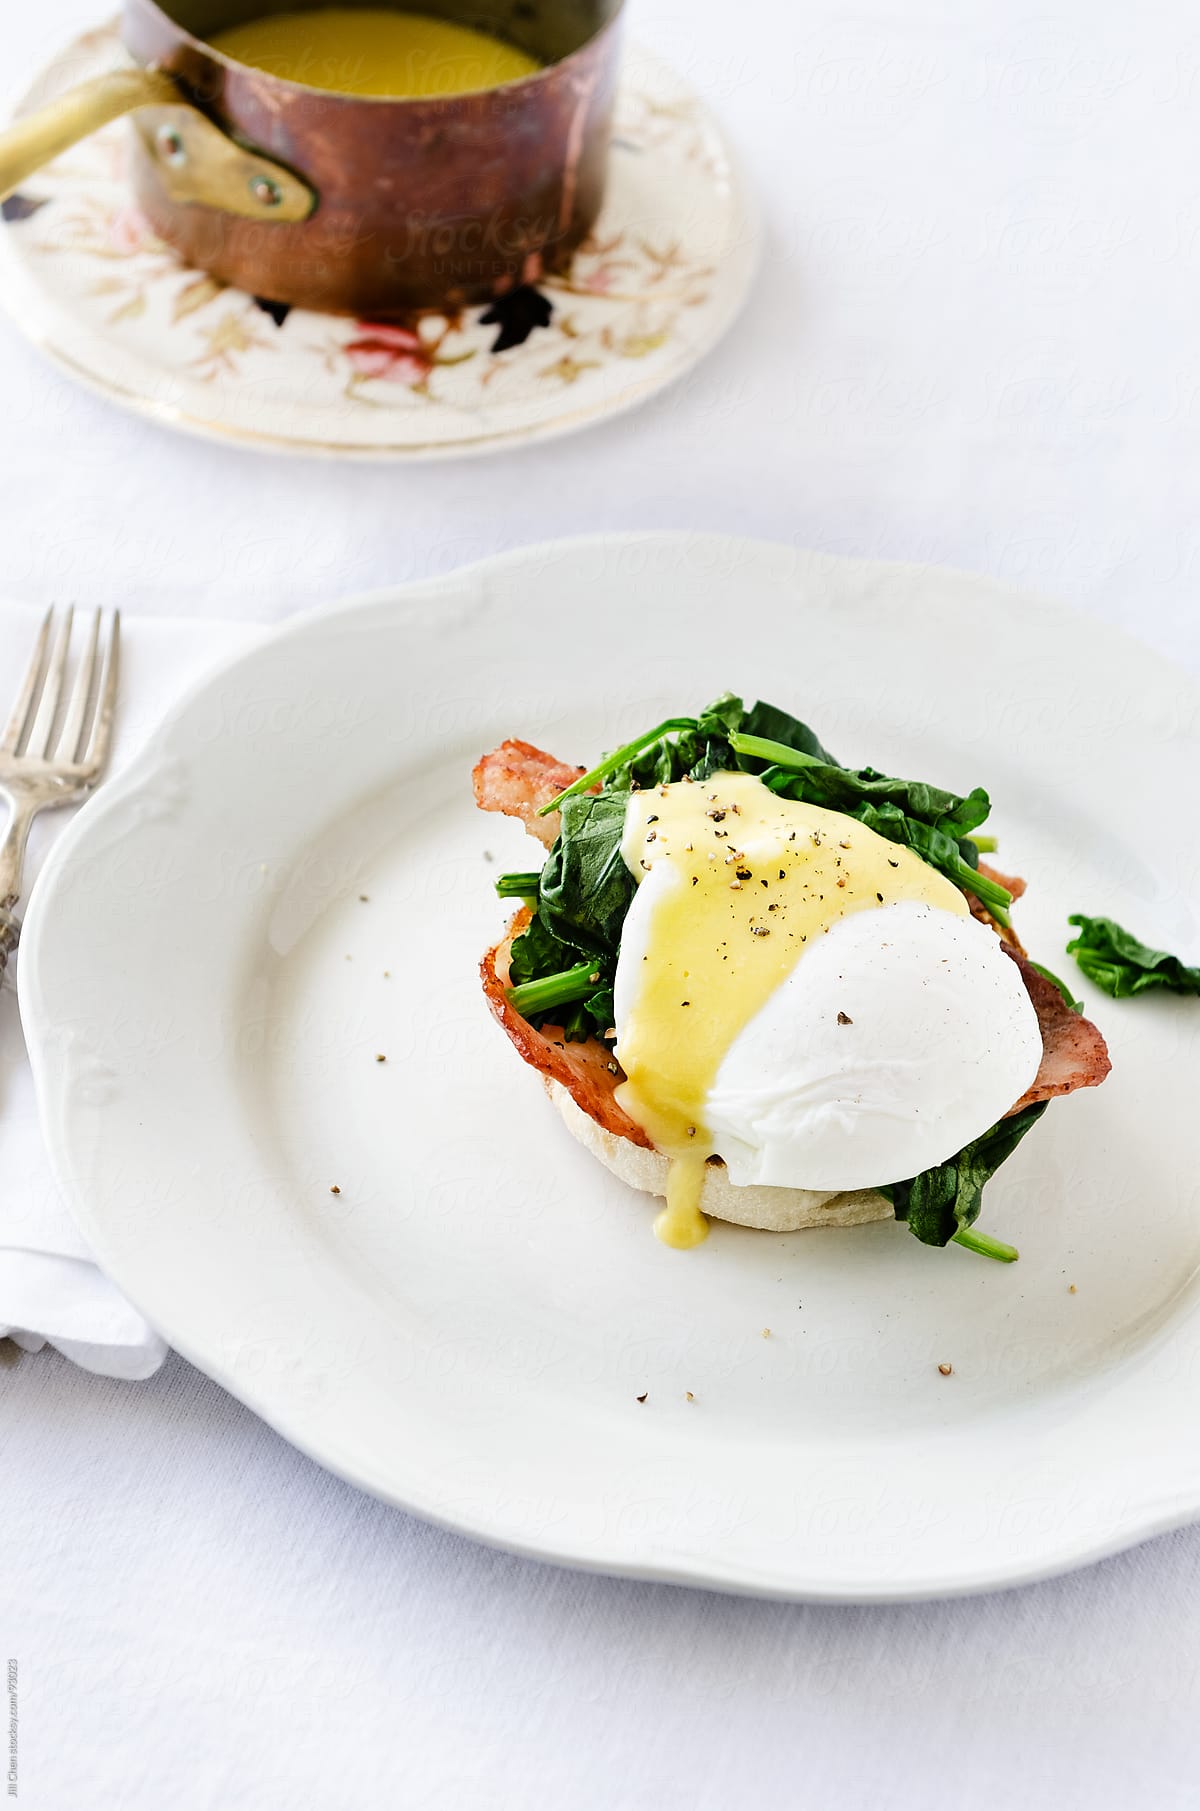 Eggs benedict florentine with hollandaise sauce, spinach and bacon